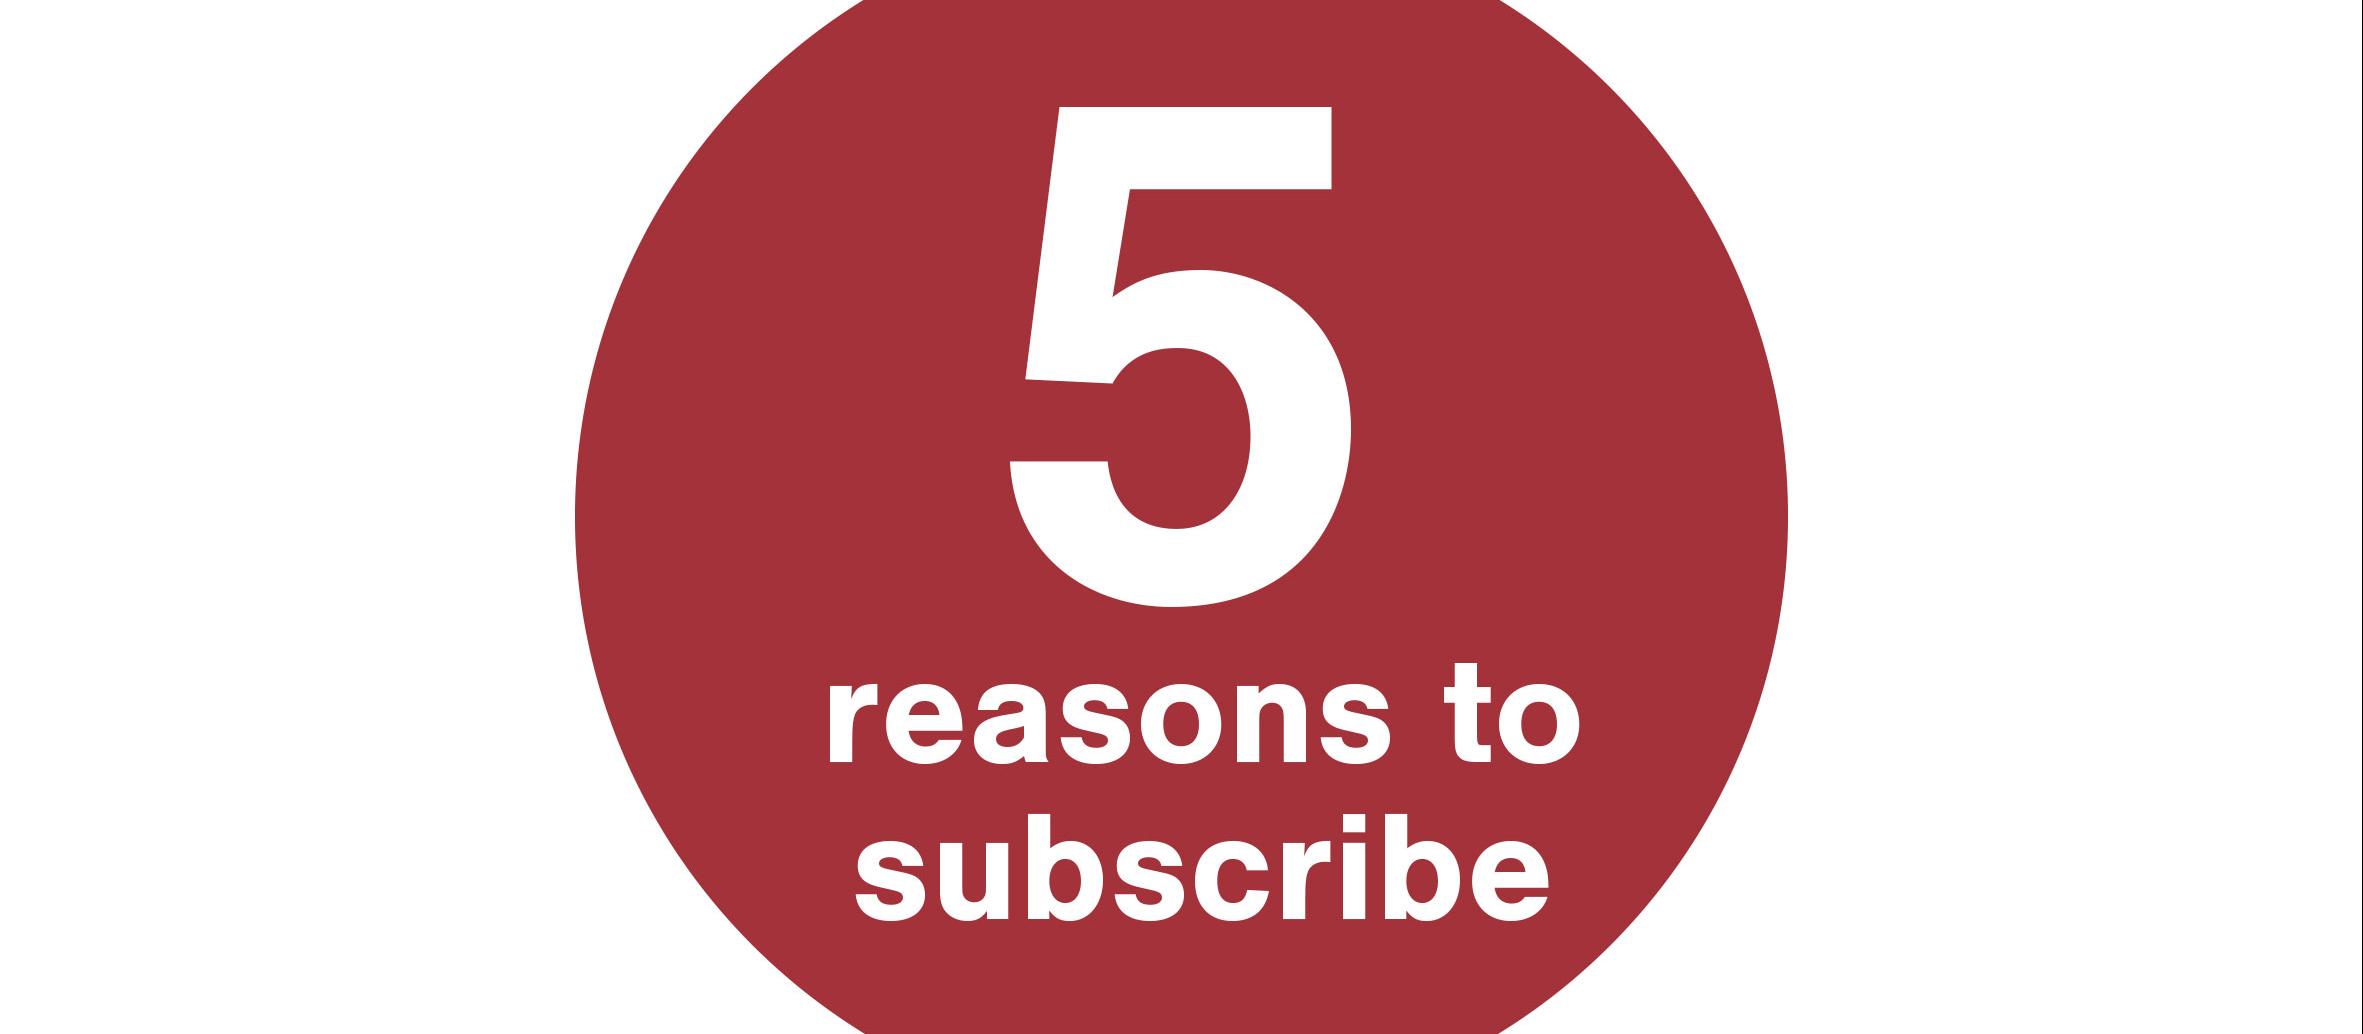 5 reasons to subscribe 